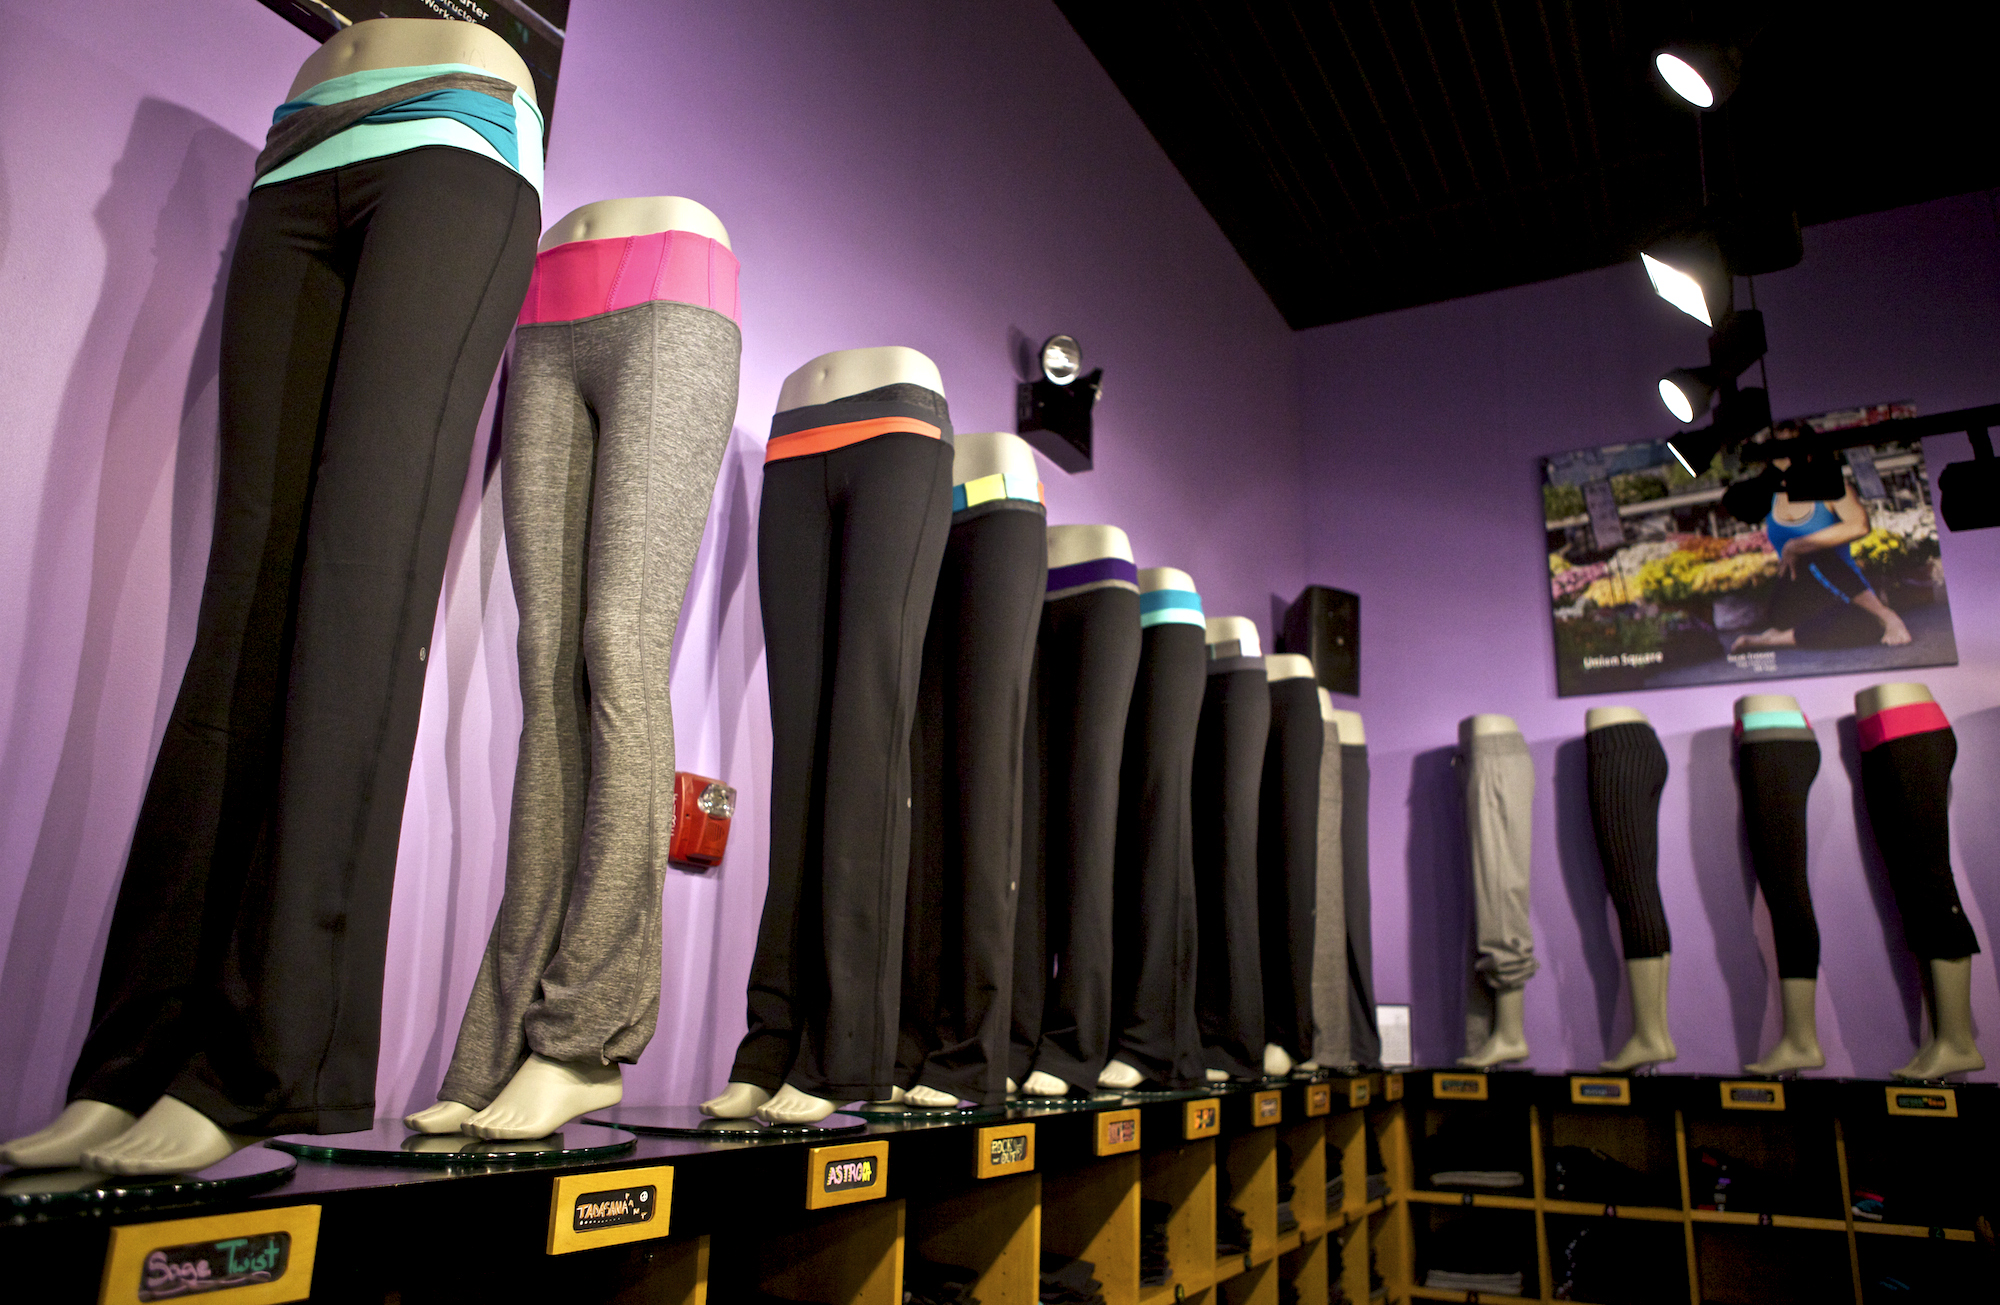 $400 Yoga Pants Are Just the Beginning - Bloomberg